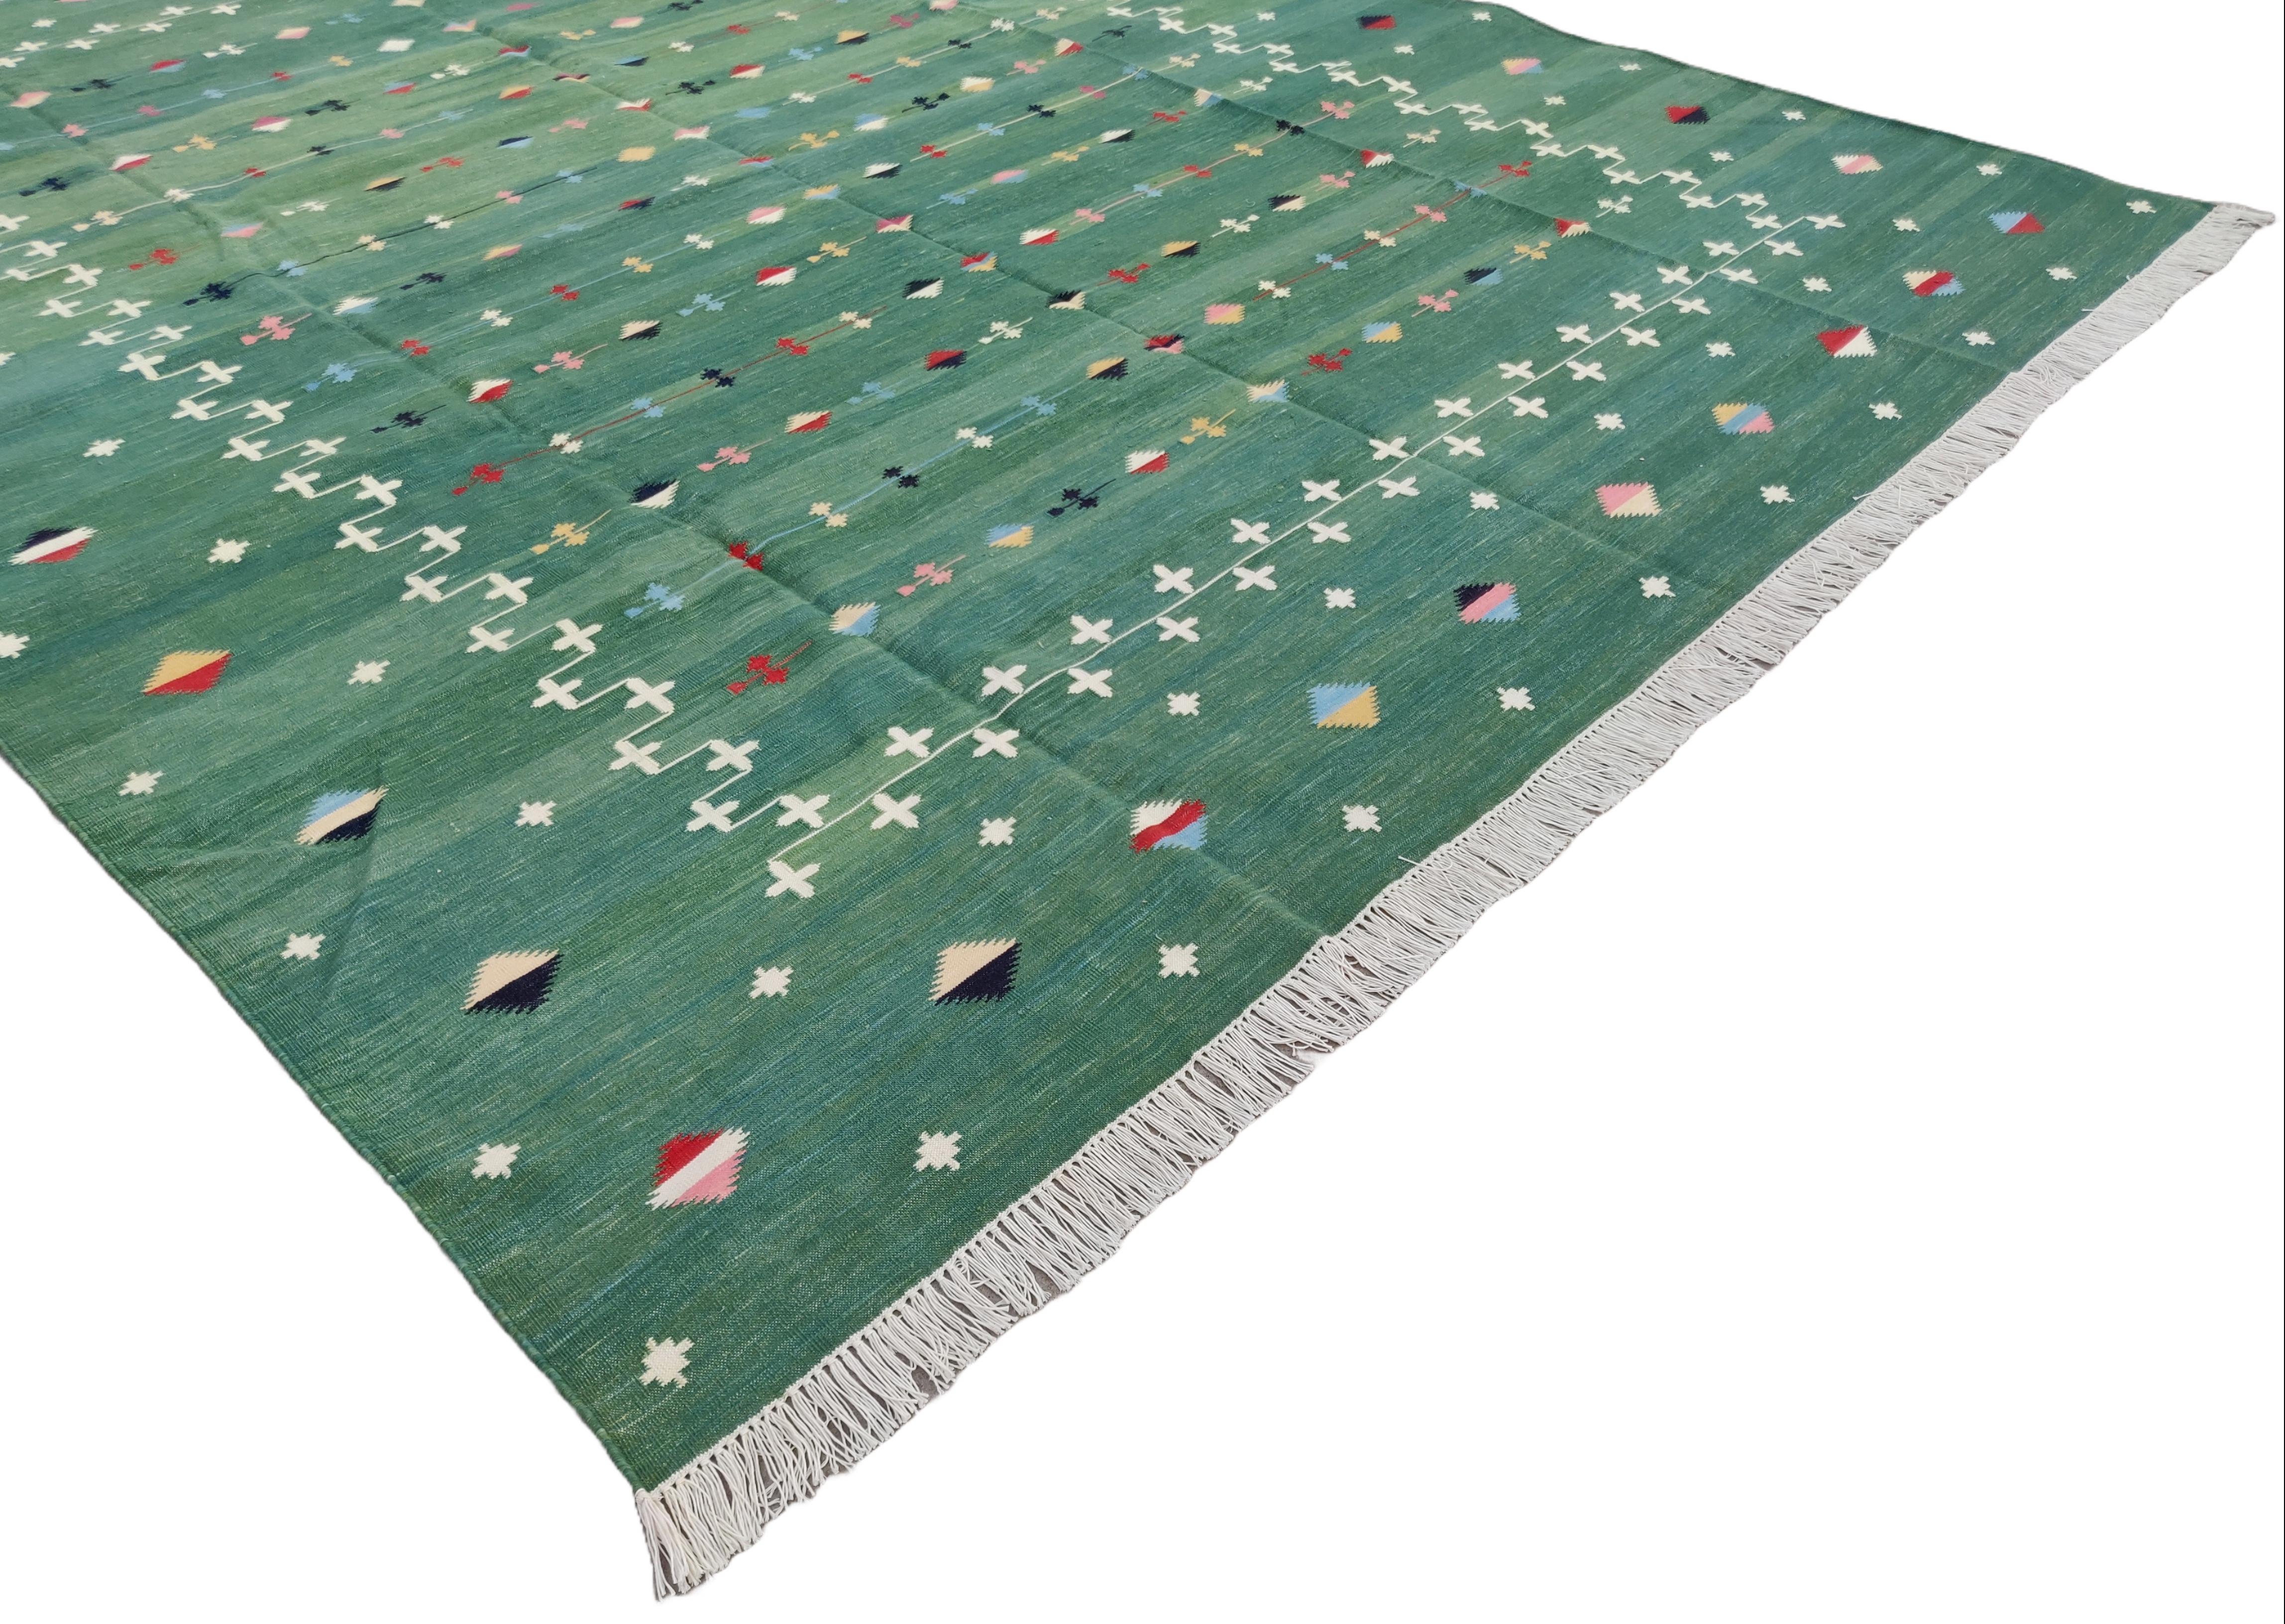 Cotton Vegetable Dyed Area Rug, Forest Green Indian Shooting Star Dhurrie-9'x12'
These special flat-weave dhurries are hand-woven with 15 ply 100% cotton yarn. Due to the special manufacturing techniques used to create our rugs, the size and color